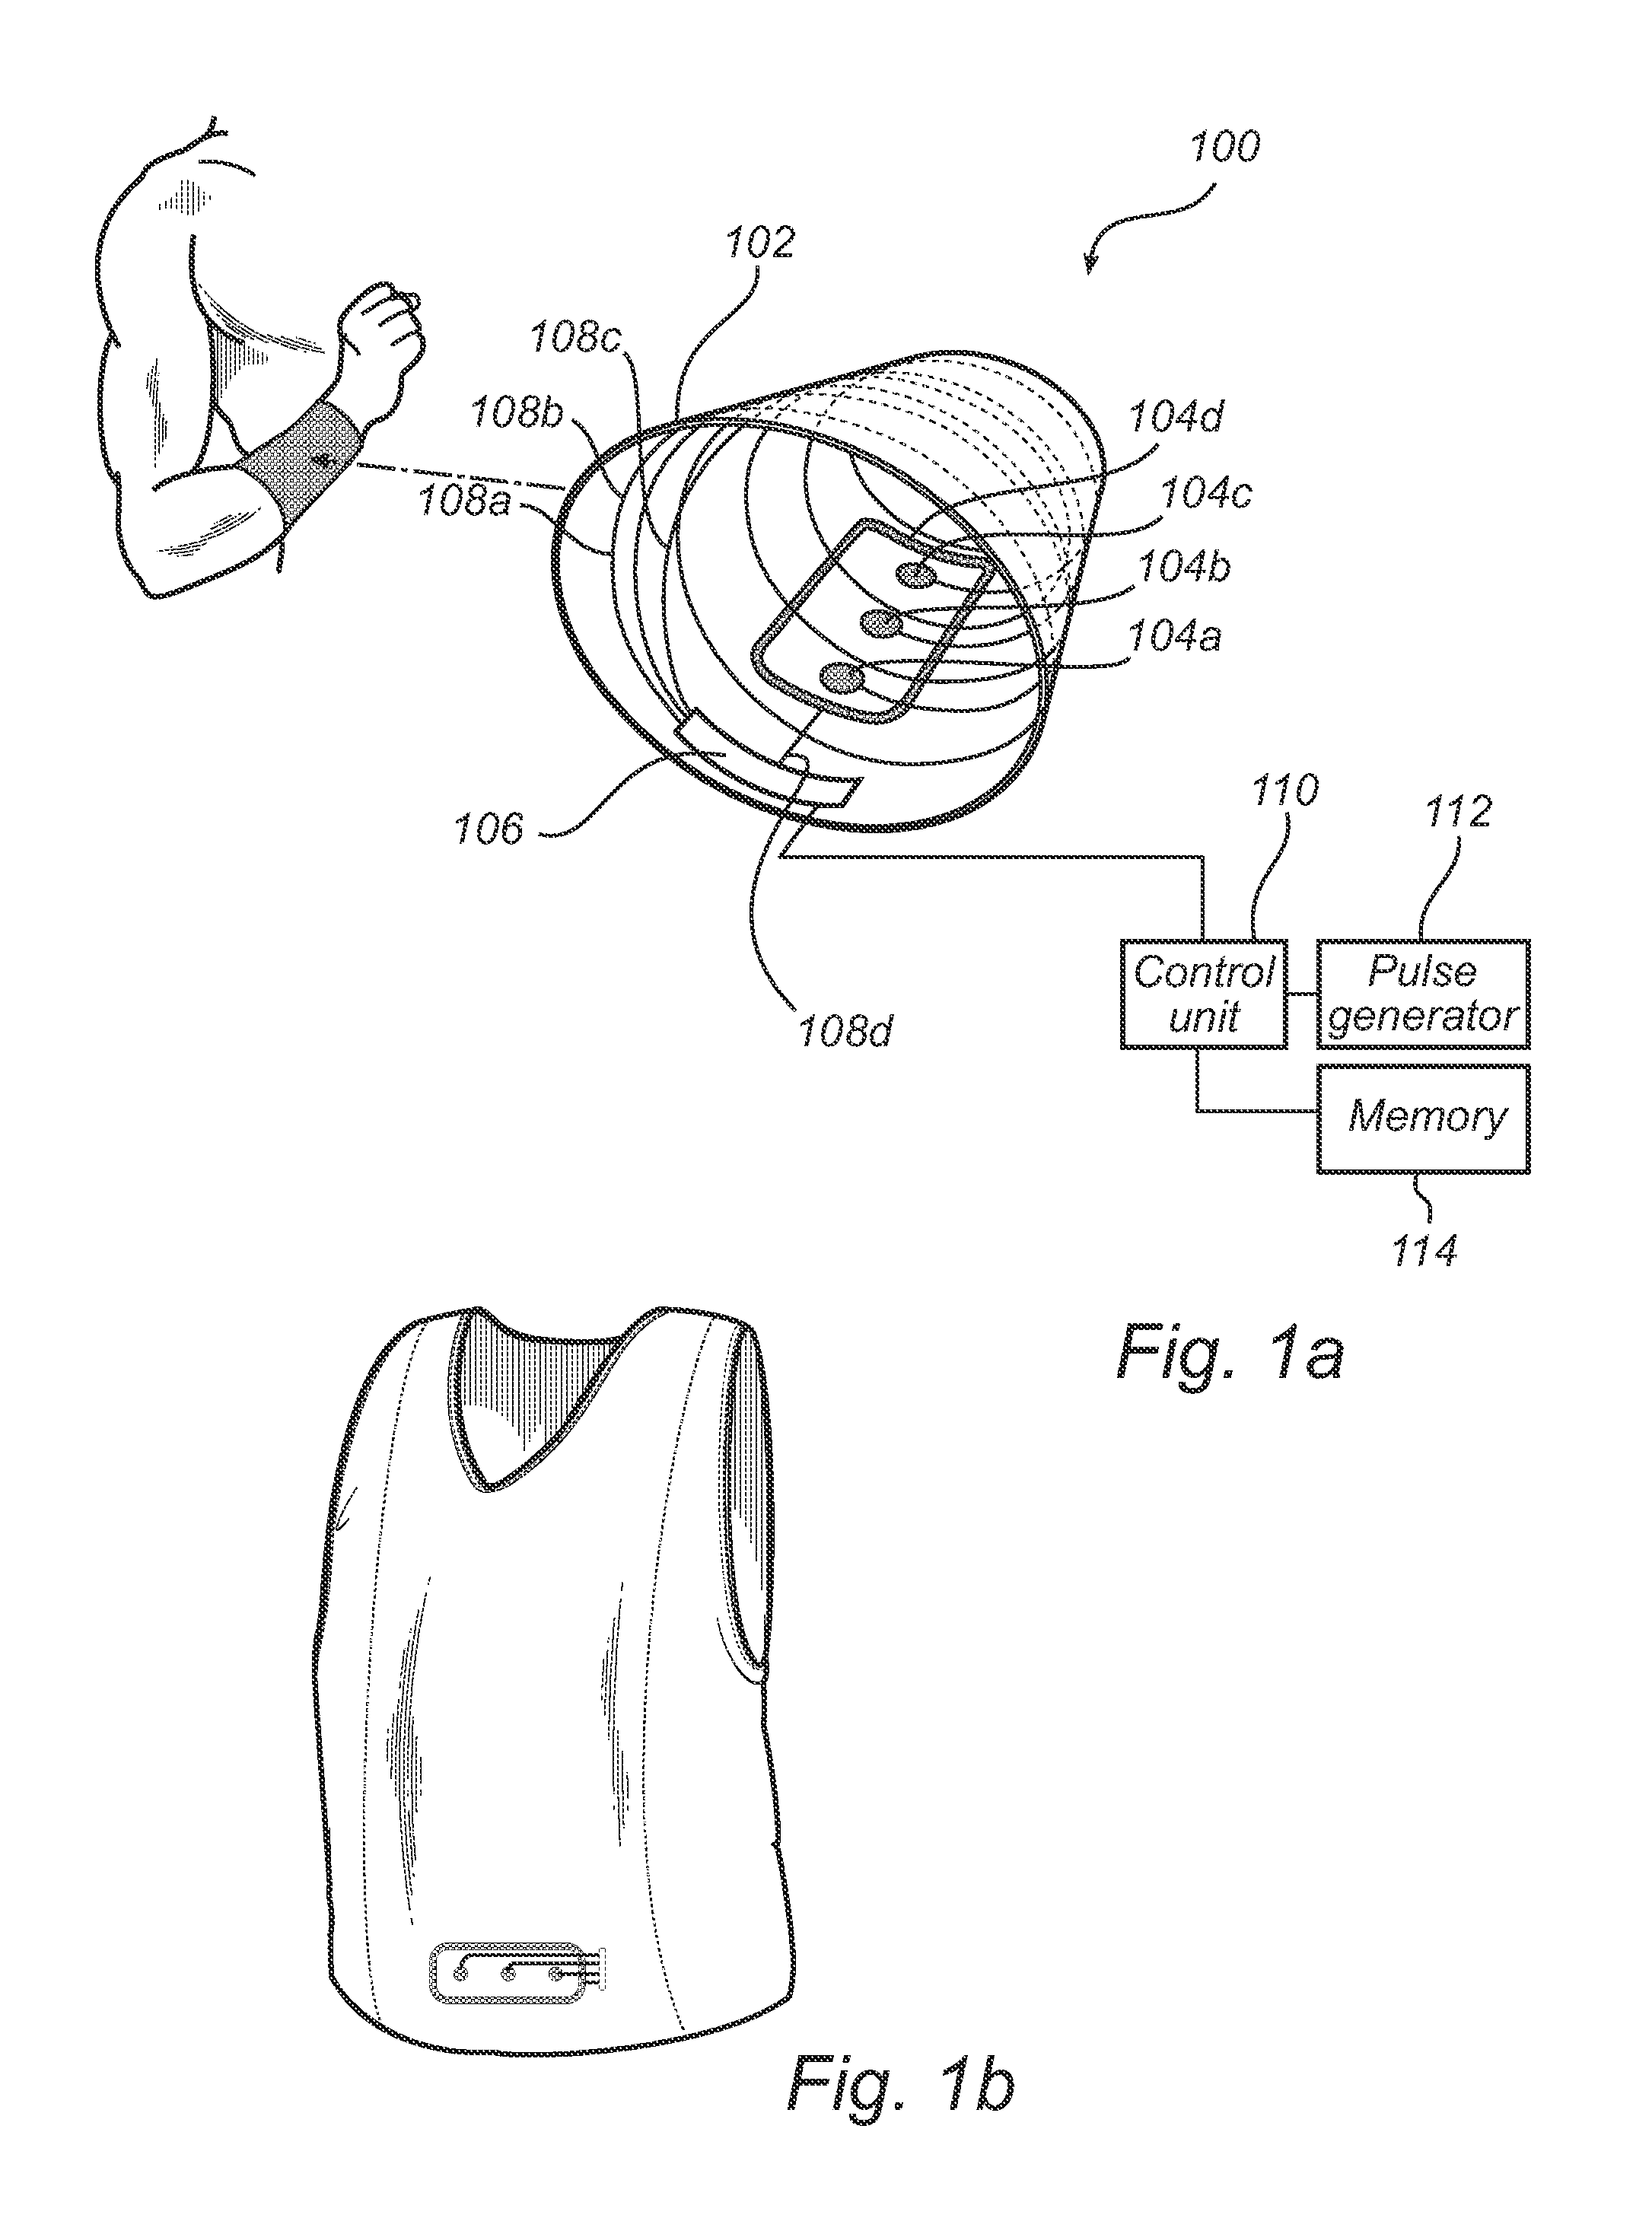 Wearable device and system for a tamper free electric stimulation of a body